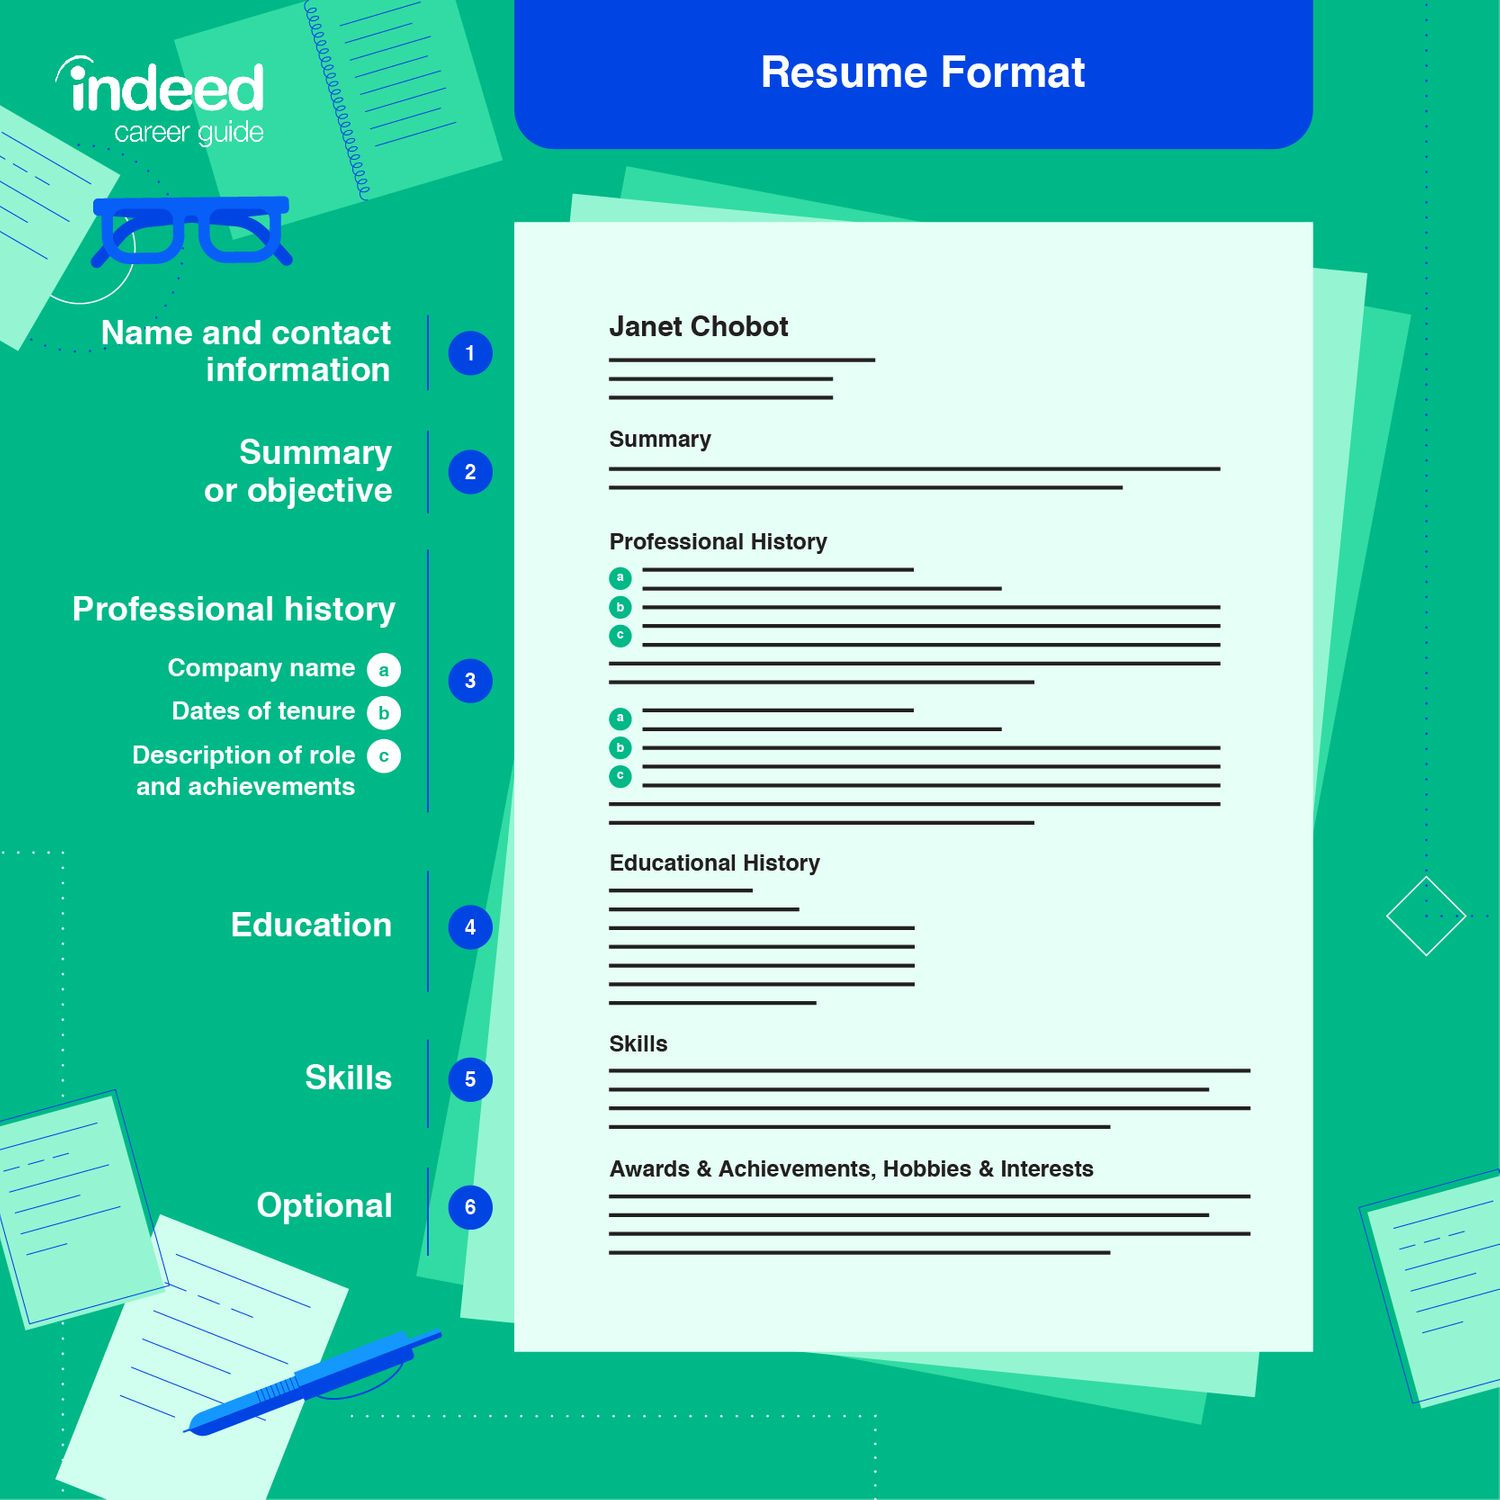 Indeed Sample Resume for High School Student How to Write A Great Resume with No Experience Indeed.com